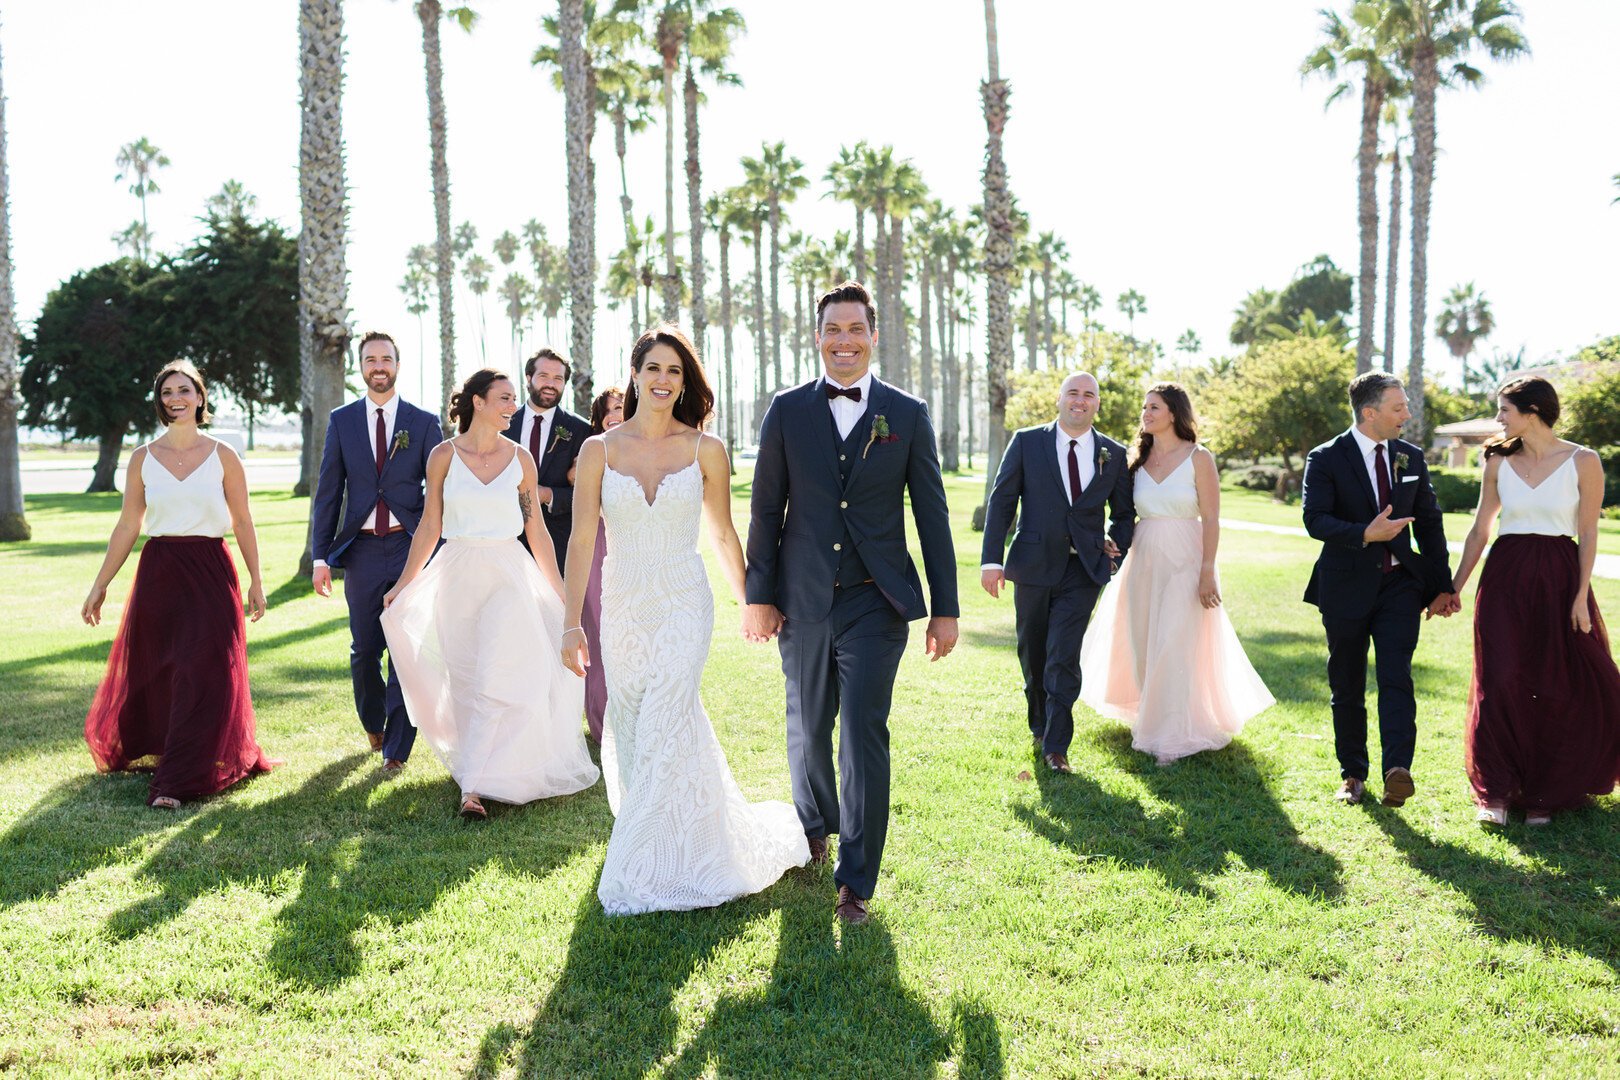 www.santabarbarawedding.com | Kaitie Brainerd | Santa Barbara Courthouse | Blush by Hayley Paige | Indochino | Revelry | Bride and Groom with the Wedding Party Among the Palm Trees